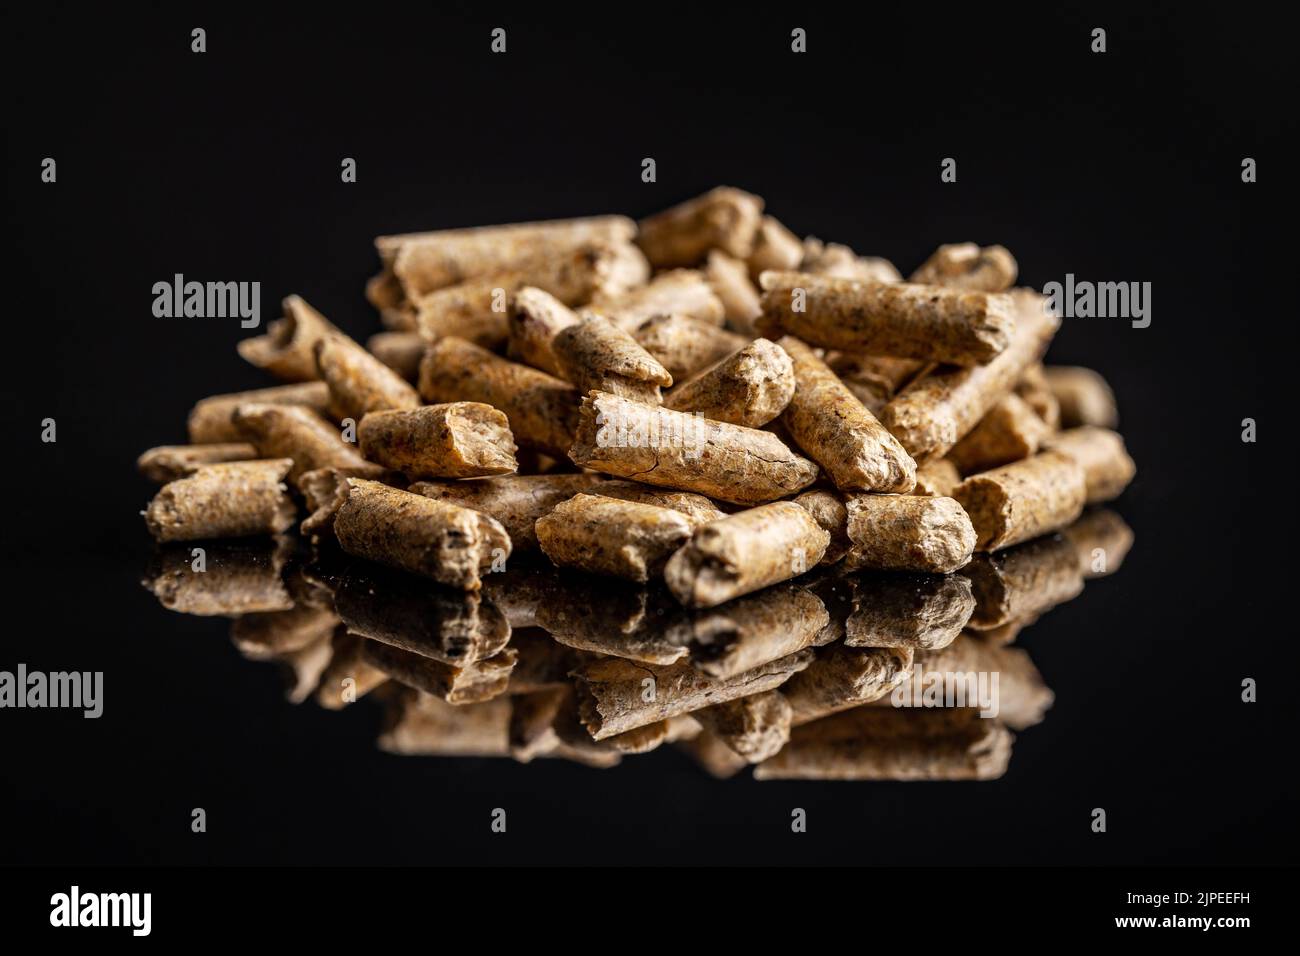 Wooden pellets on a black background. Biomass - Renewable source of heating. Stock Photo